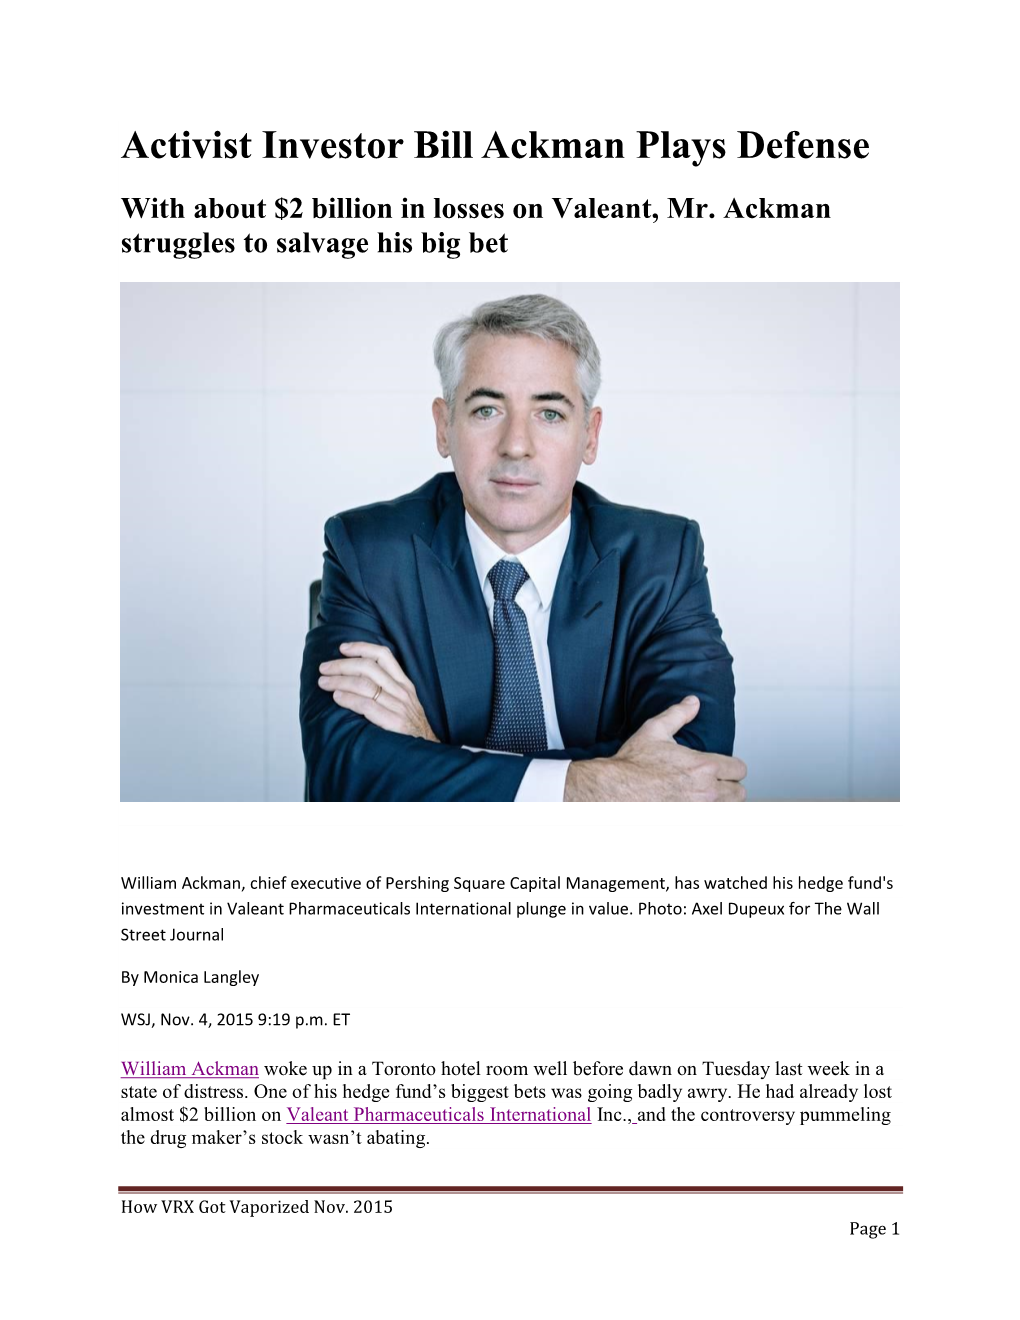 Activist Investor Bill Ackman Plays Defense with About $2 Billion in Losses on Valeant, Mr